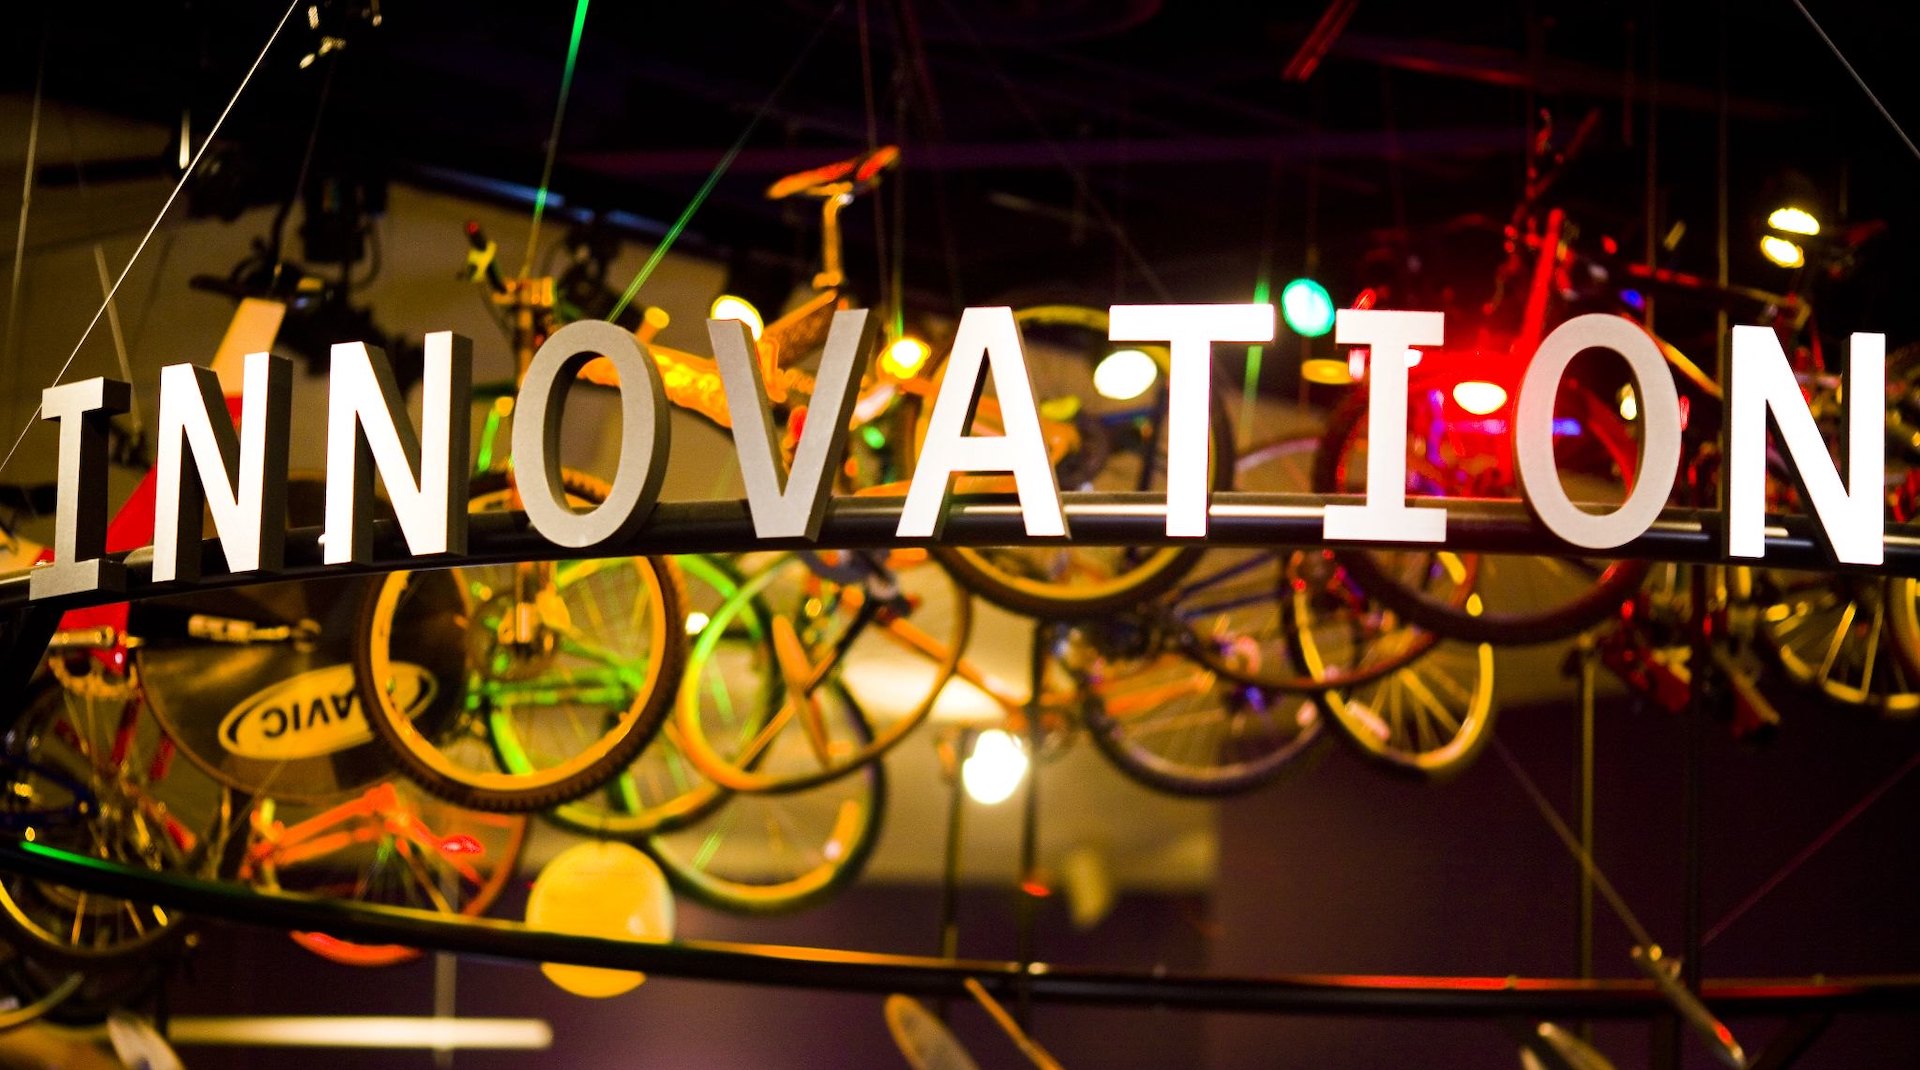 An Innovation sign hangs in a bike shop. News companies are using discovery processes and frameworks to deliver innovative products.